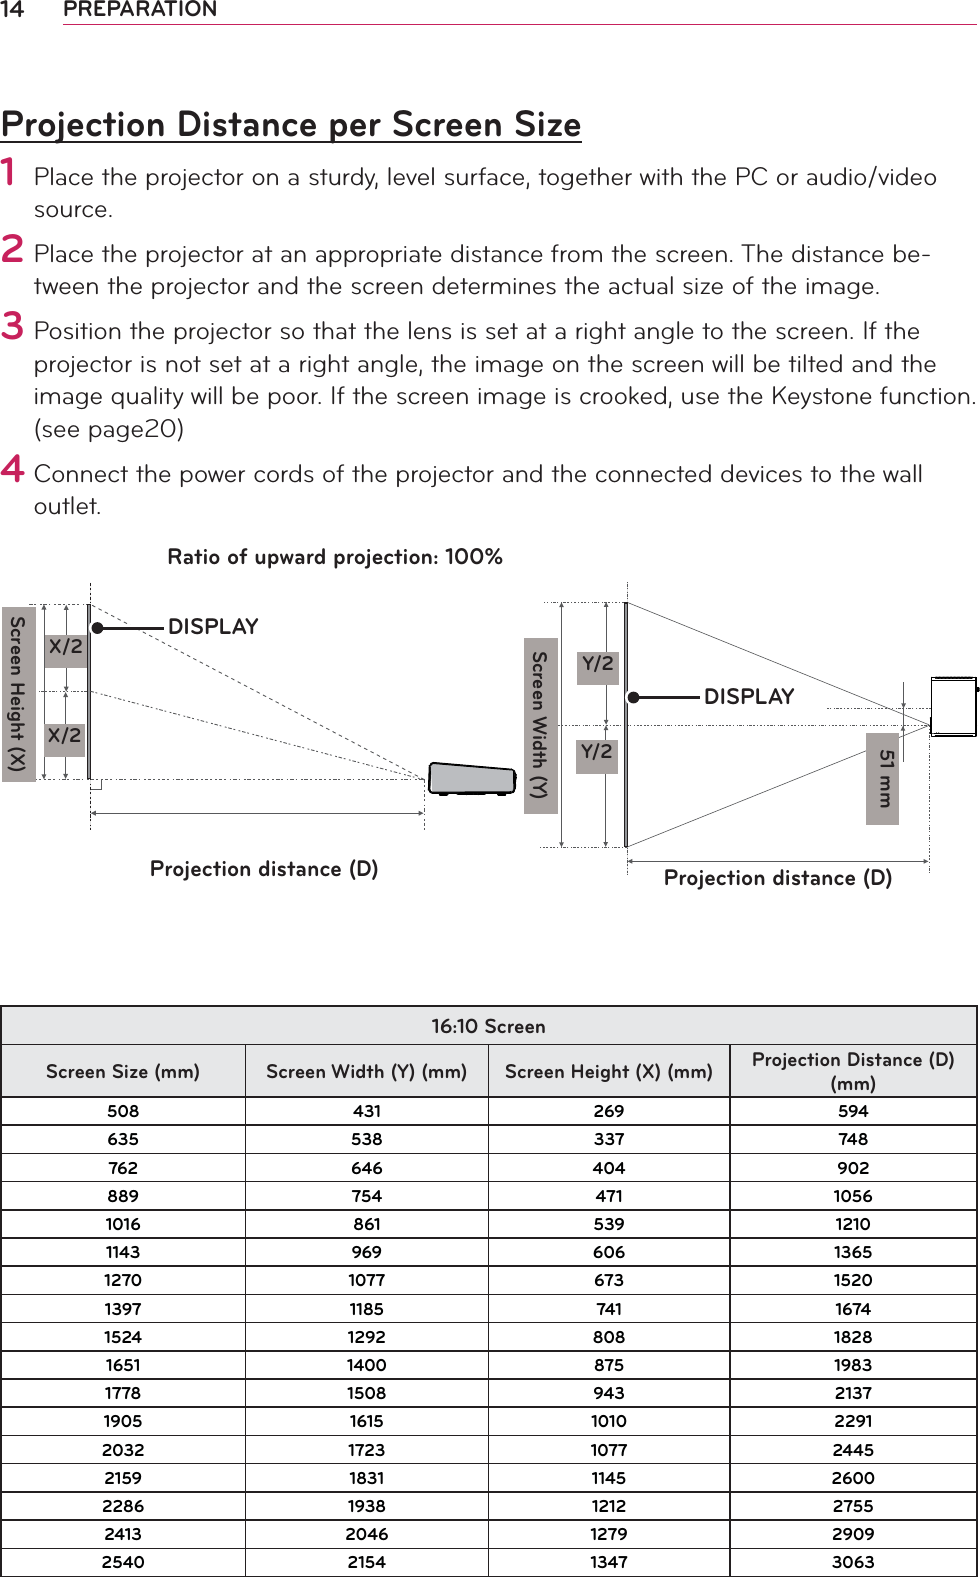 14 PREPARATIONProjection Distance per Screen Size1 Place the projector on a sturdy, level surface, together with the PC or audio/video source.2 Place the projector at an appropriate distance from the screen. The distance be-tween the projector and the screen determines the actual size of the image.3 Position the projector so that the lens is set at a right angle to the screen. If the projector is not set at a right angle, the image on the screen will be tilted and the image quality will be poor. If the screen image is crooked, use the Keystone function.(see page20)4 Connect the power cords of the projector and the connected devices to the wall outlet.Ratio of upward projection: 100%Screen Height (X)X/2X/2Screen Width (Y)Y/2Y/2DISPLAYProjection distance (D) Projection distance (D)DISPLAY51 mm16:10 ScreenScreen Size (mm) Screen Width (Y) (mm) Screen Height (X) (mm) Projection Distance (D) (mm)508 431 269 594635 538 337 748762 646 404 902889 754 471 10561016 861 539 12101143 969 606 13651270 1077 673 15201397 1185 741 16741524 1292 808 18281651 1400 875 19831778 1508 943 21371905 1615 1010 22912032 1723 1077 24452159 1831 1145 26002286 1938 1212 27552413 2046 1279 29092540 2154 1347 3063